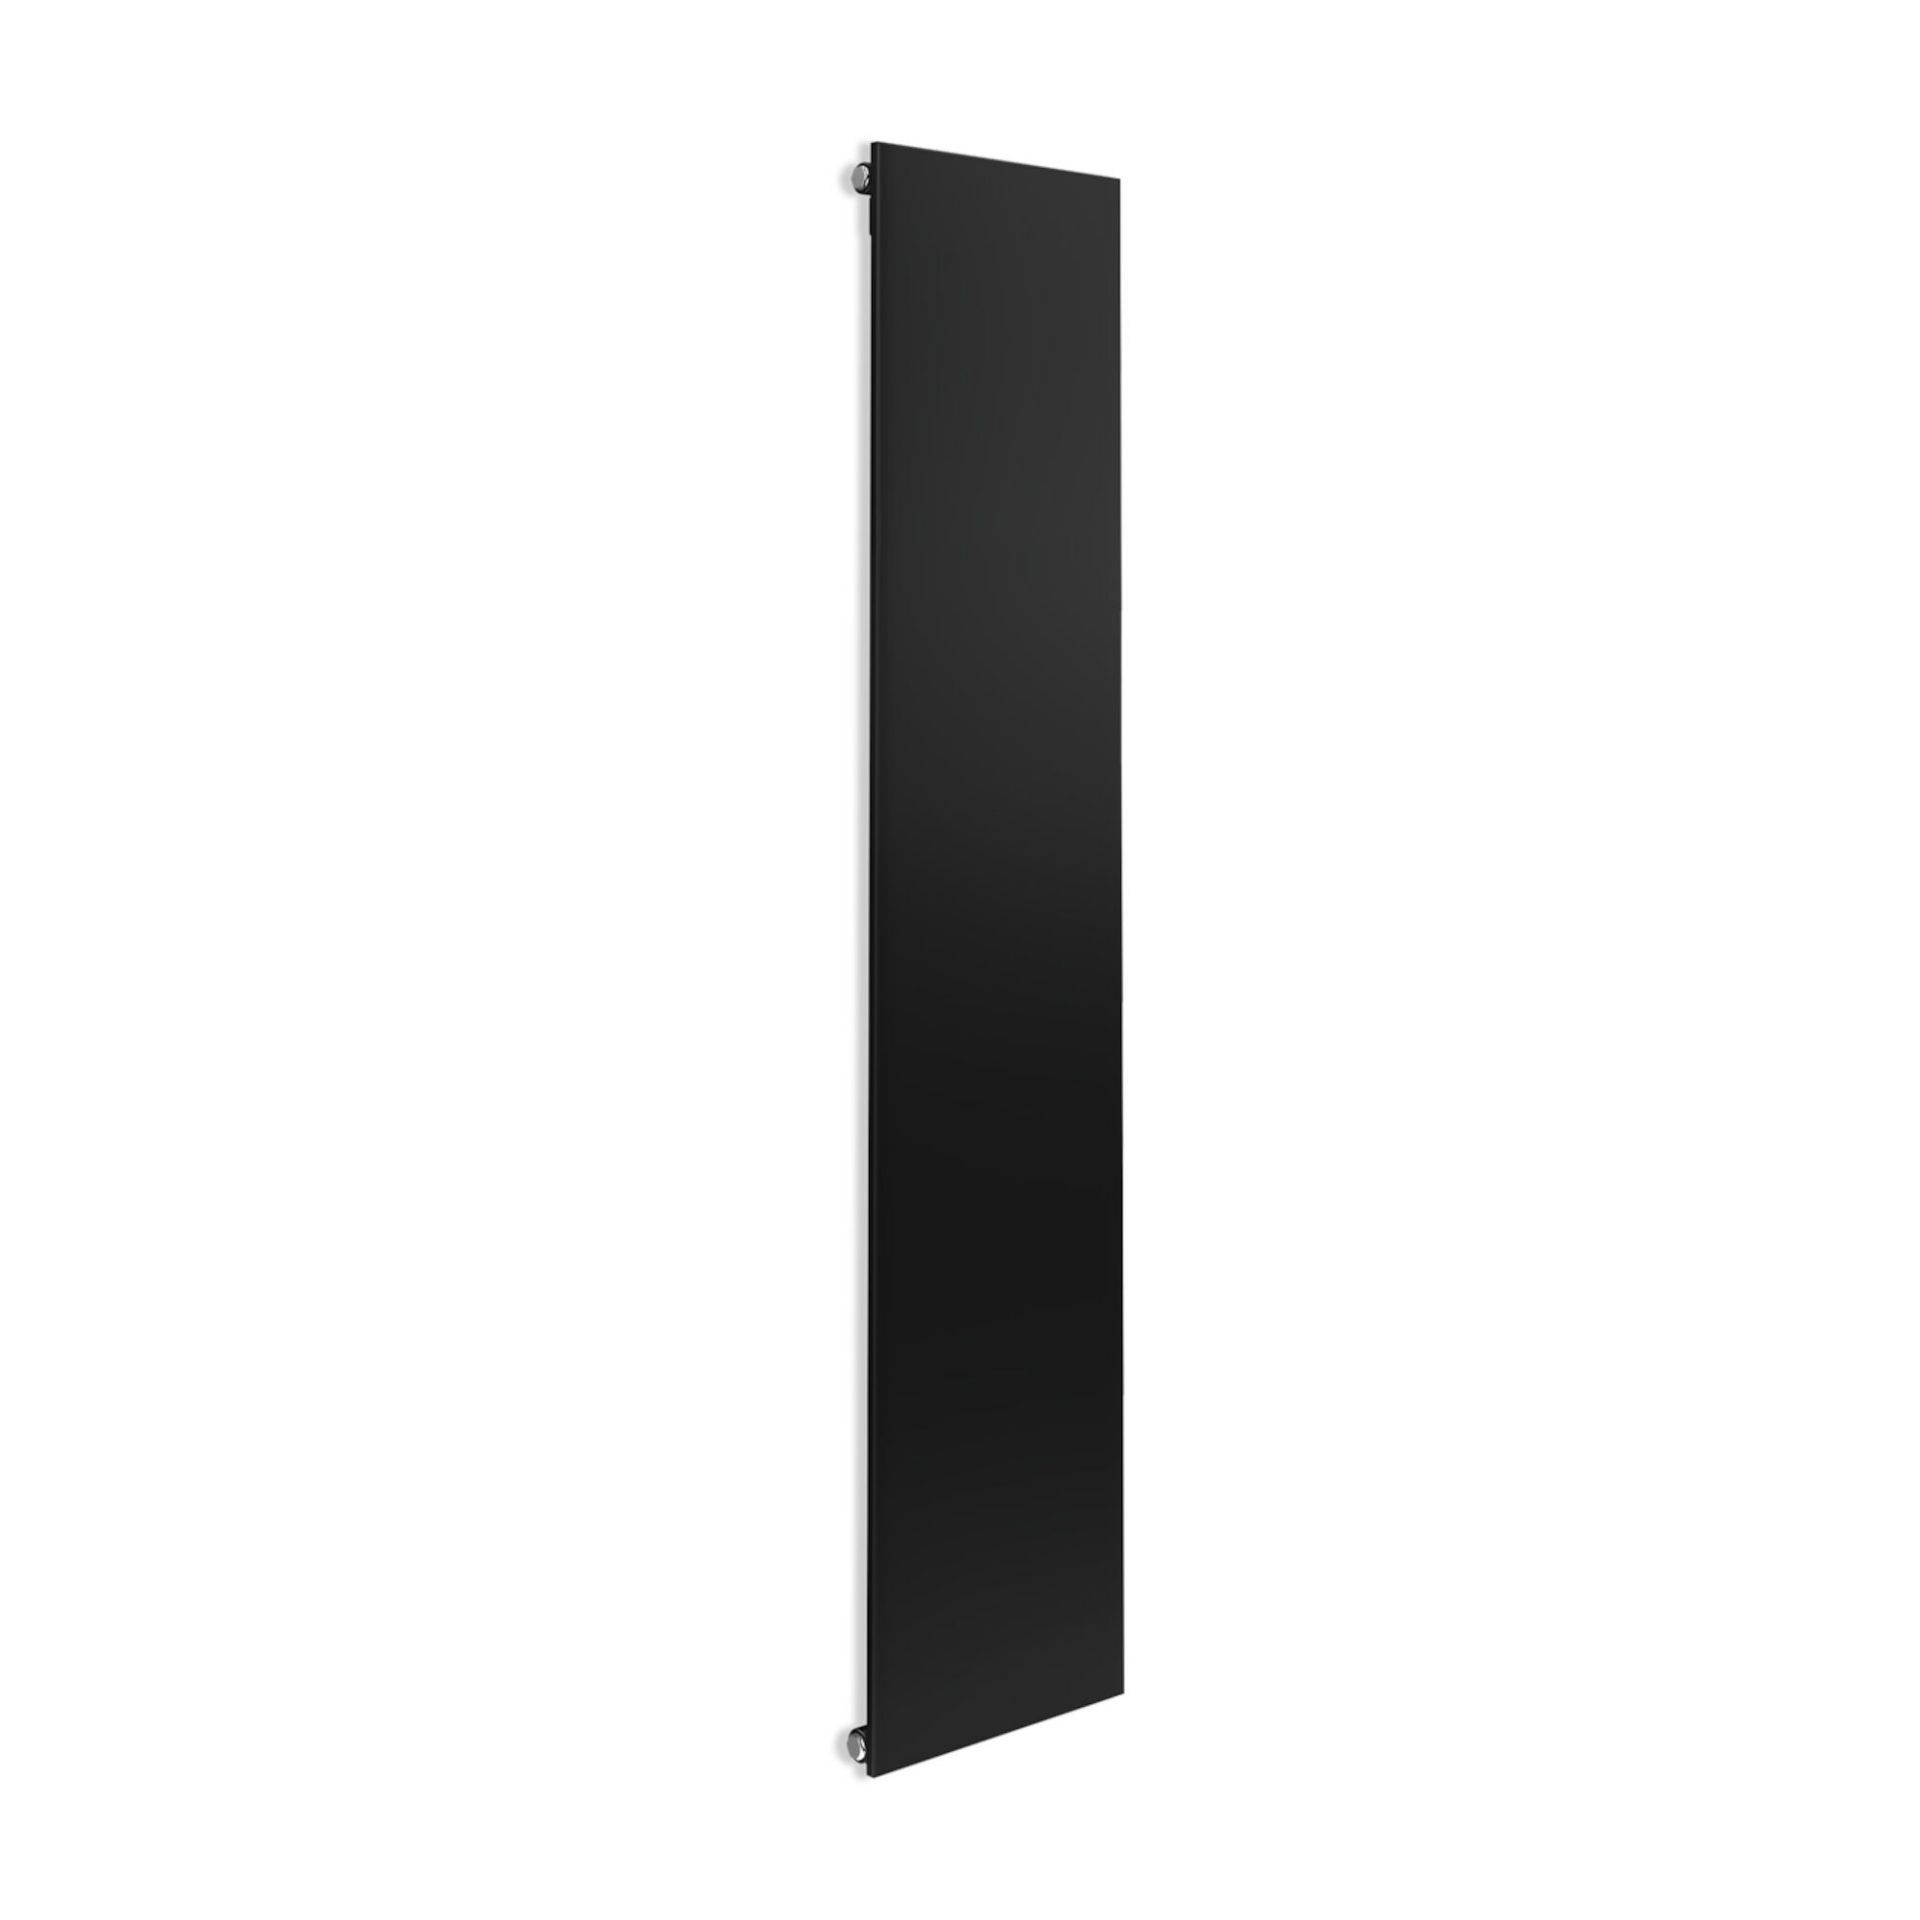 (TP99) 1813 x 385mm Ultra Slim Black Radiator. RRP £389.99. Constructed of sturdy low carbon steel